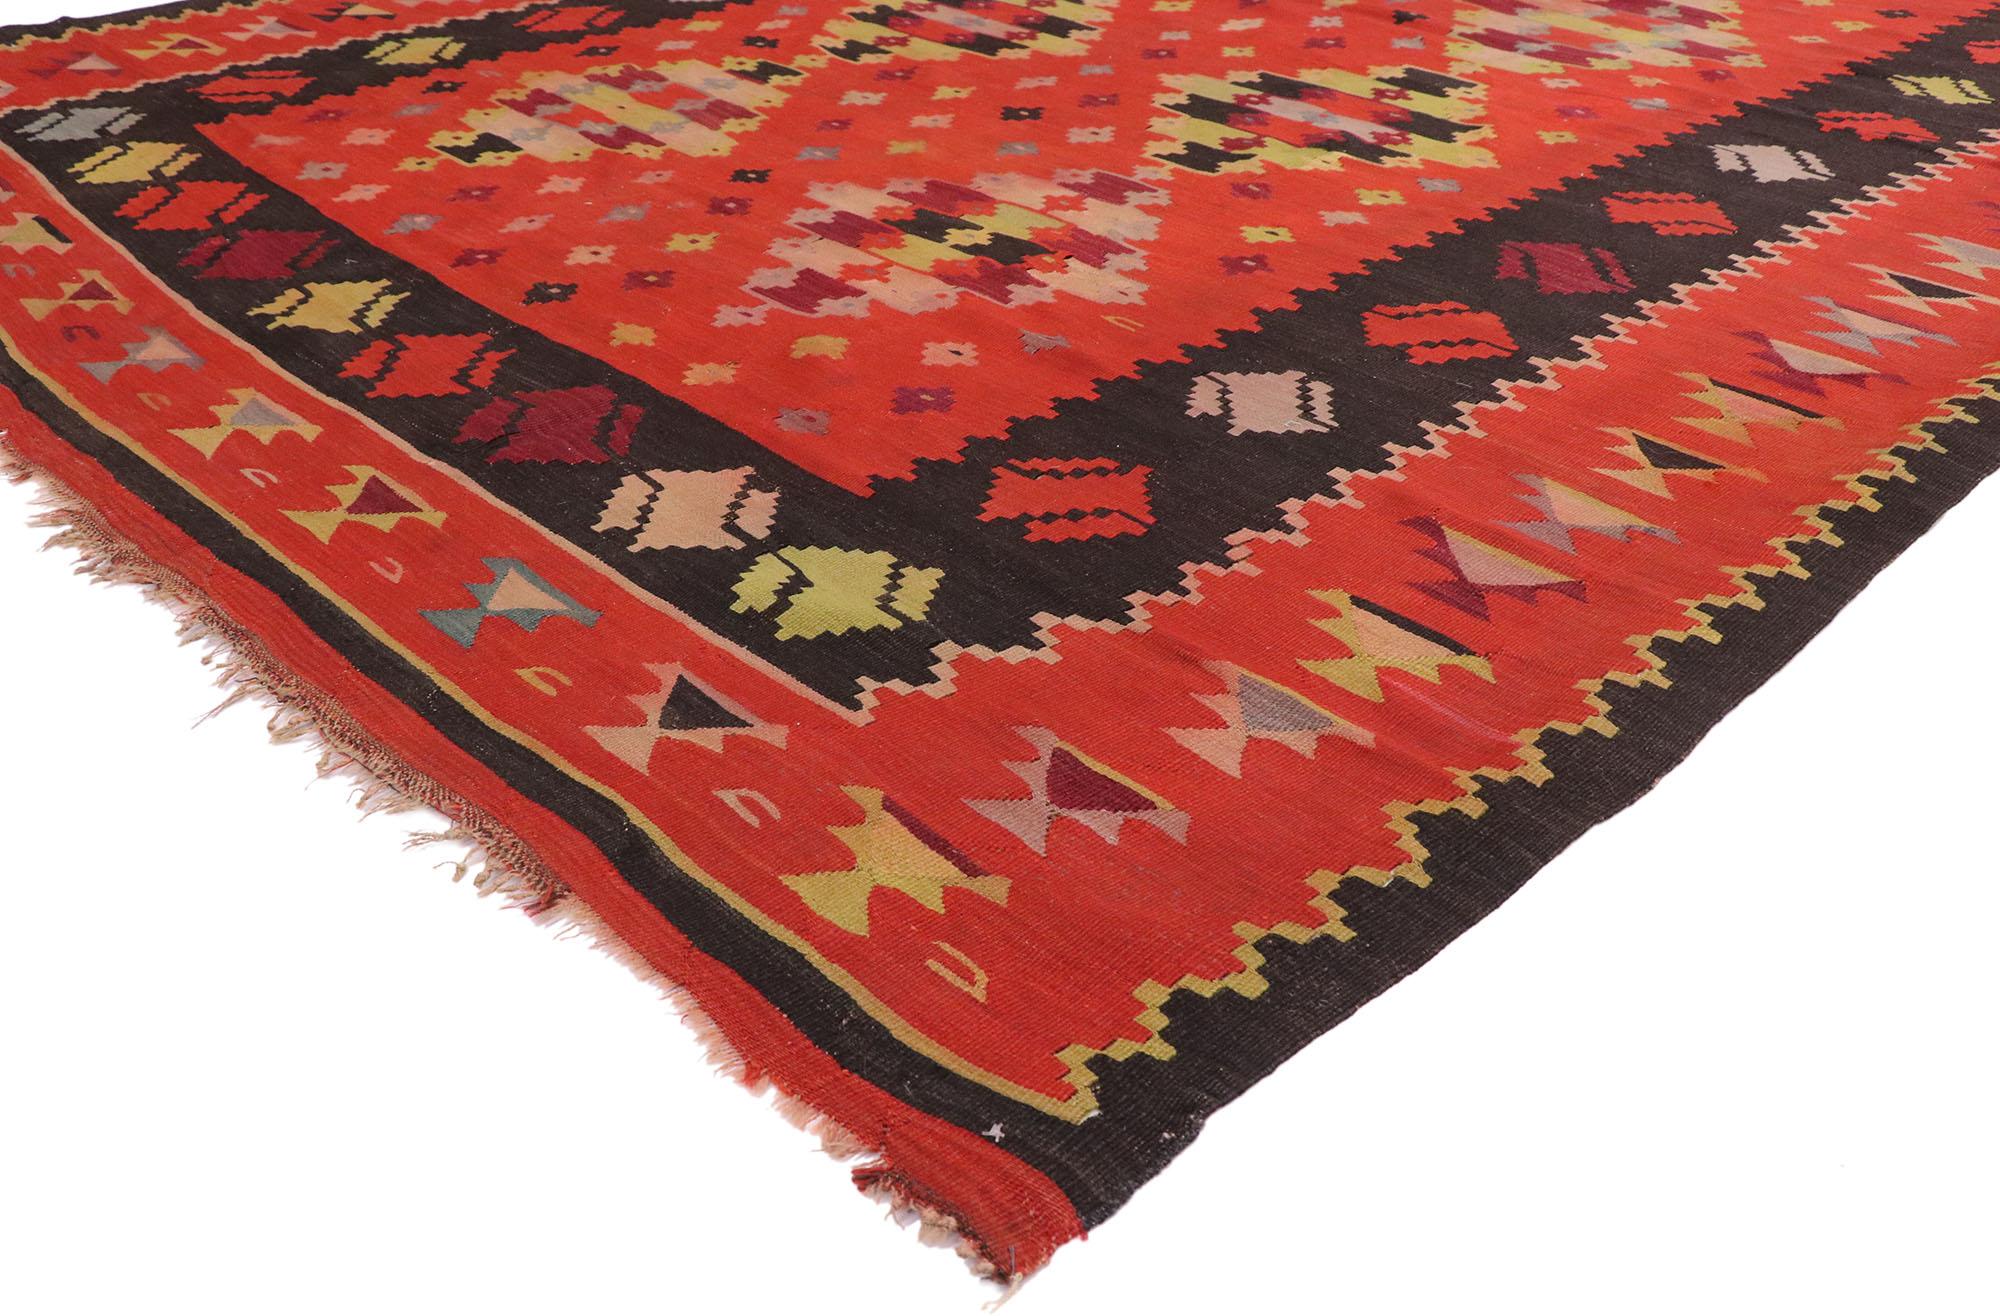 70464 Vintage Turkish Kilim Rug with Navajo Adirondack Design and Two Grey Hills Style 07'04 x 09'03. With its bold expressive design, incredible detail and texture, this handwoven wool antique Turkish Kilim rug is a captivating vision of woven